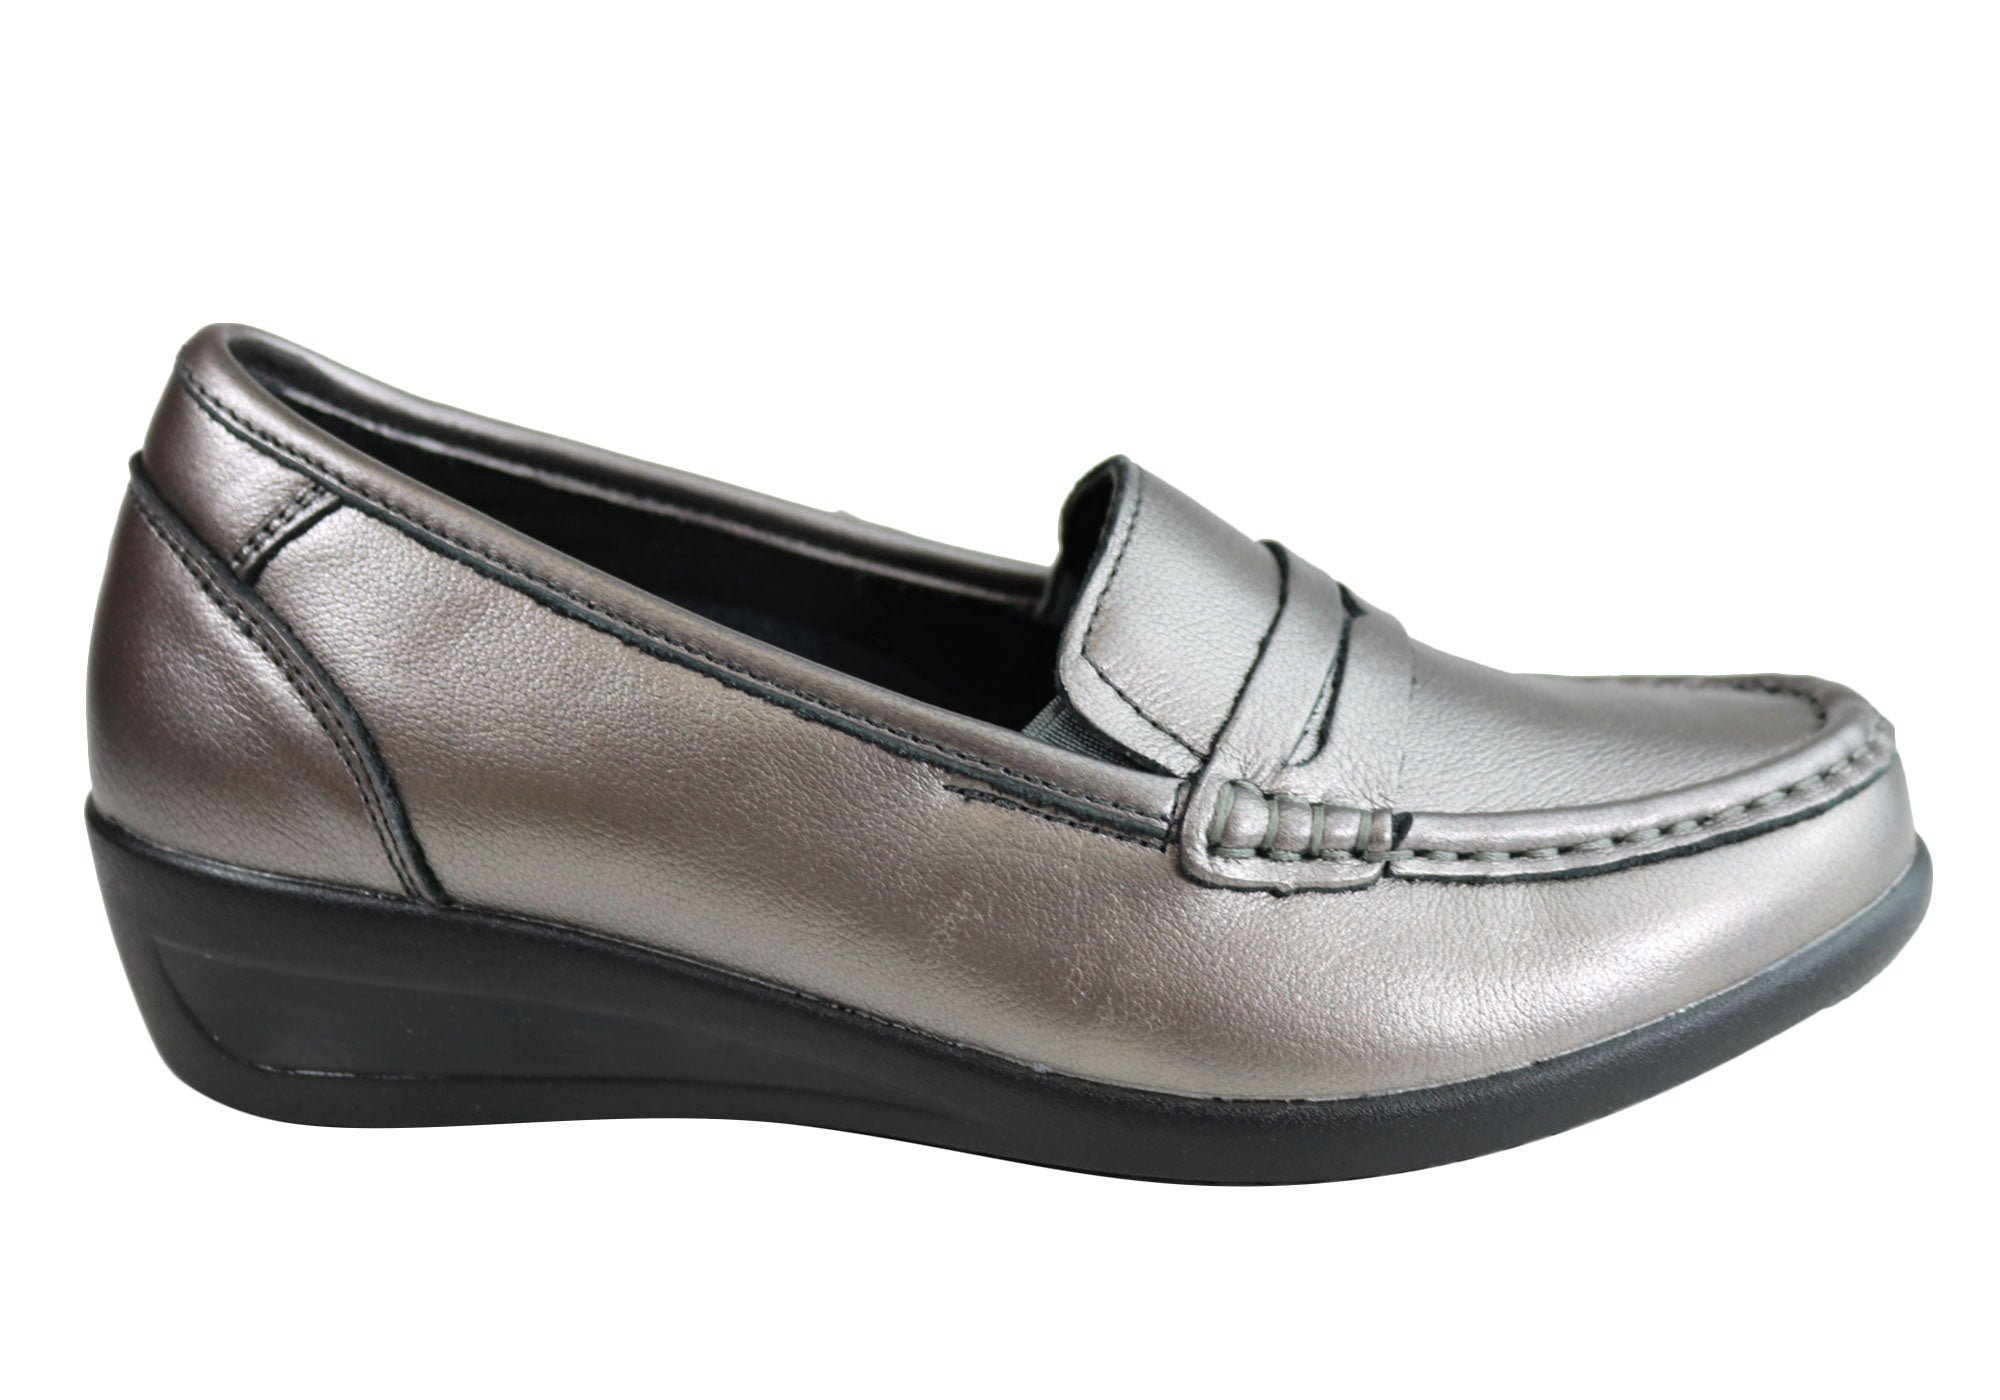 comfortable loafer shoes